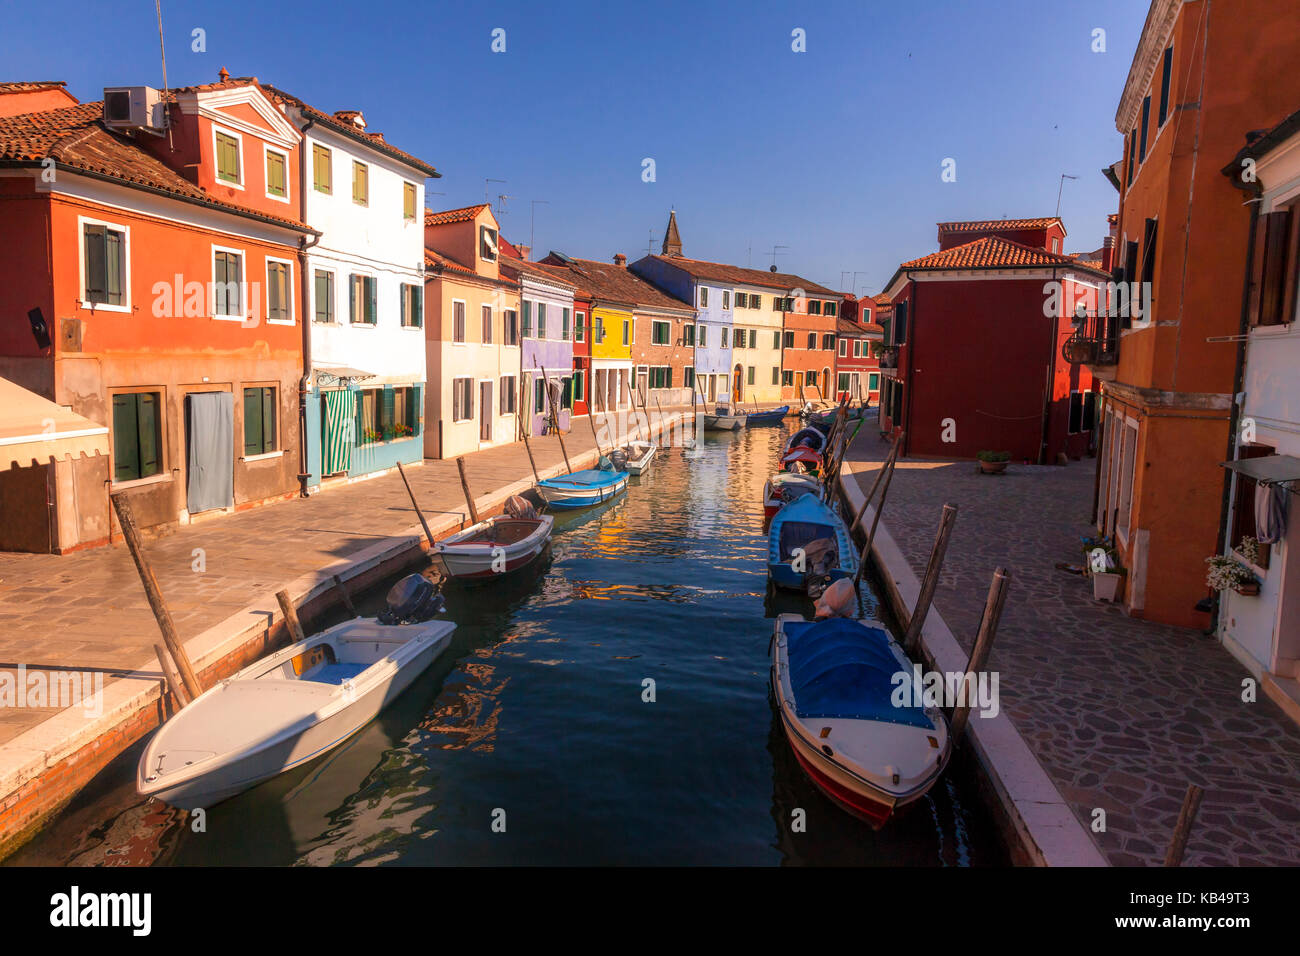 Canal scene in the colorful Italian island of Burano, located just off Venice, Italy Stock Photo